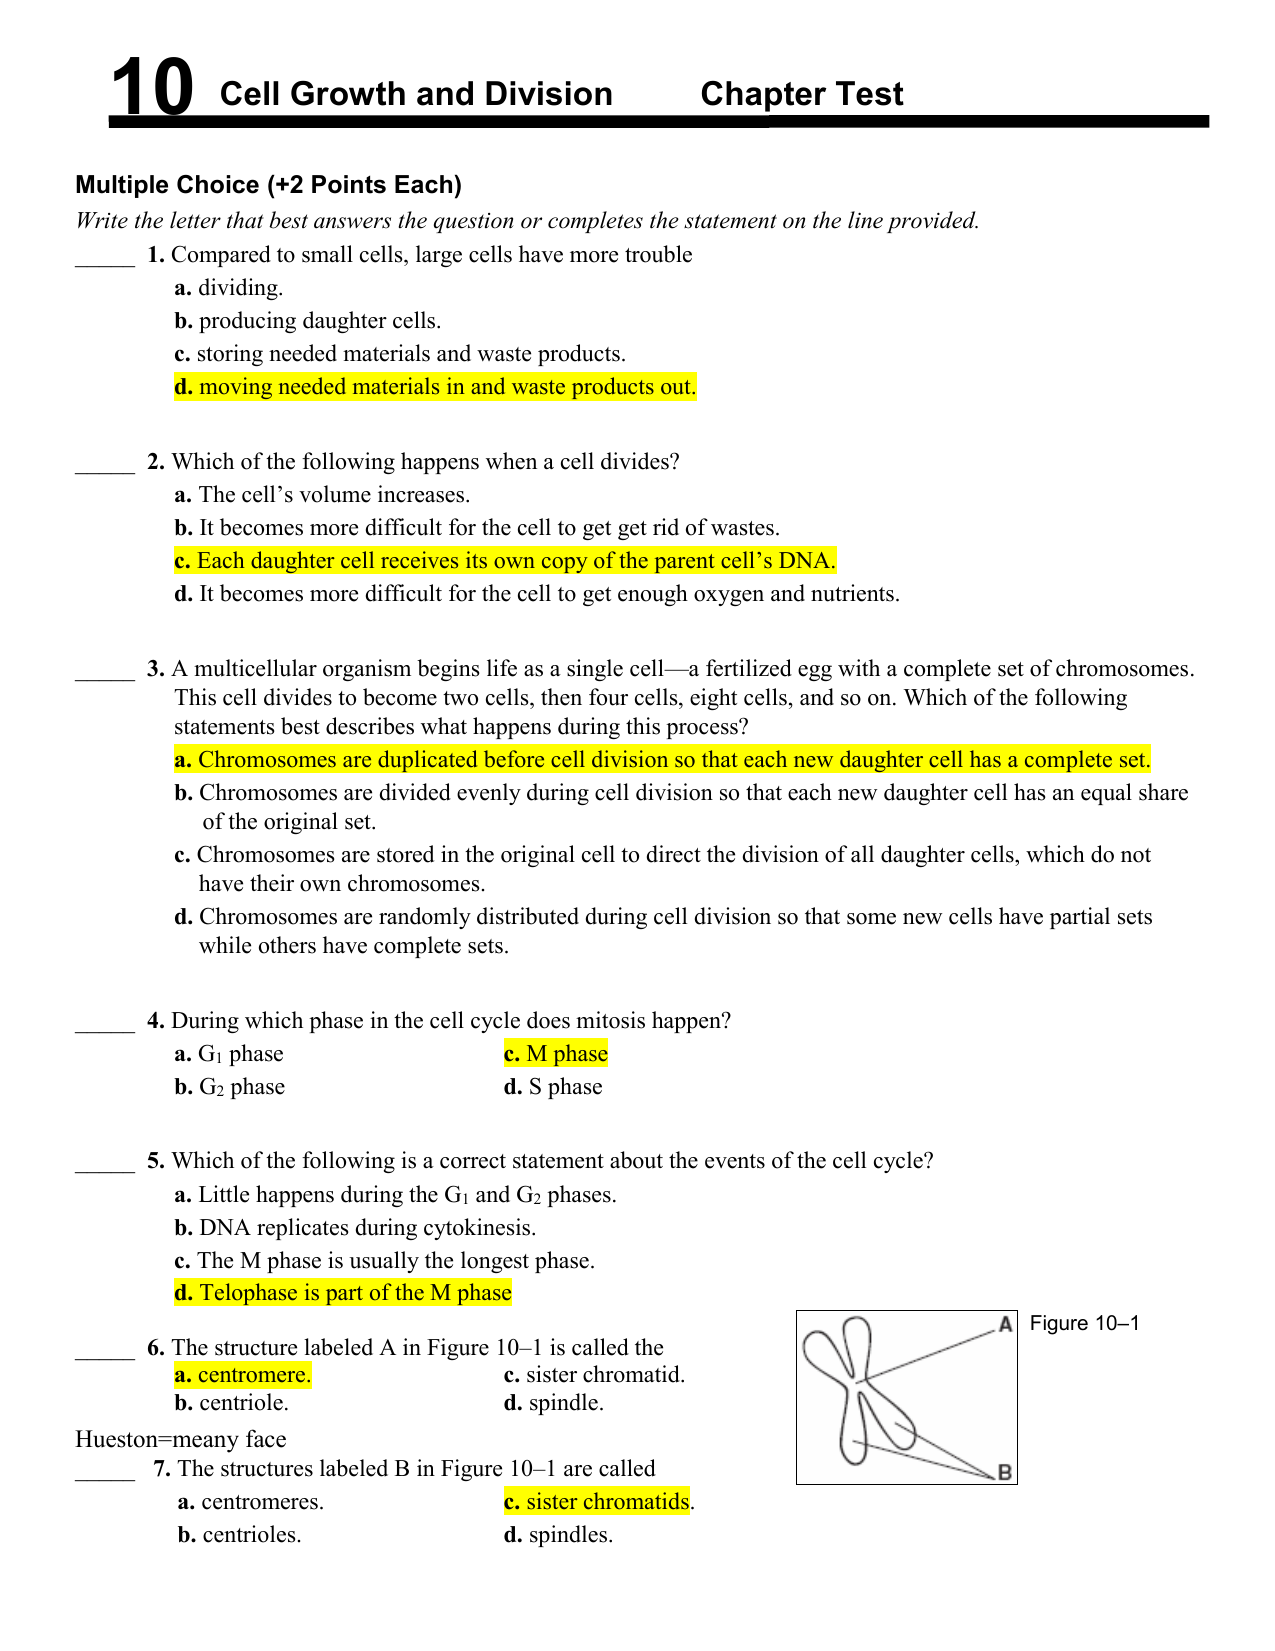 Biology chapter 10 cell growth and division test answer key File